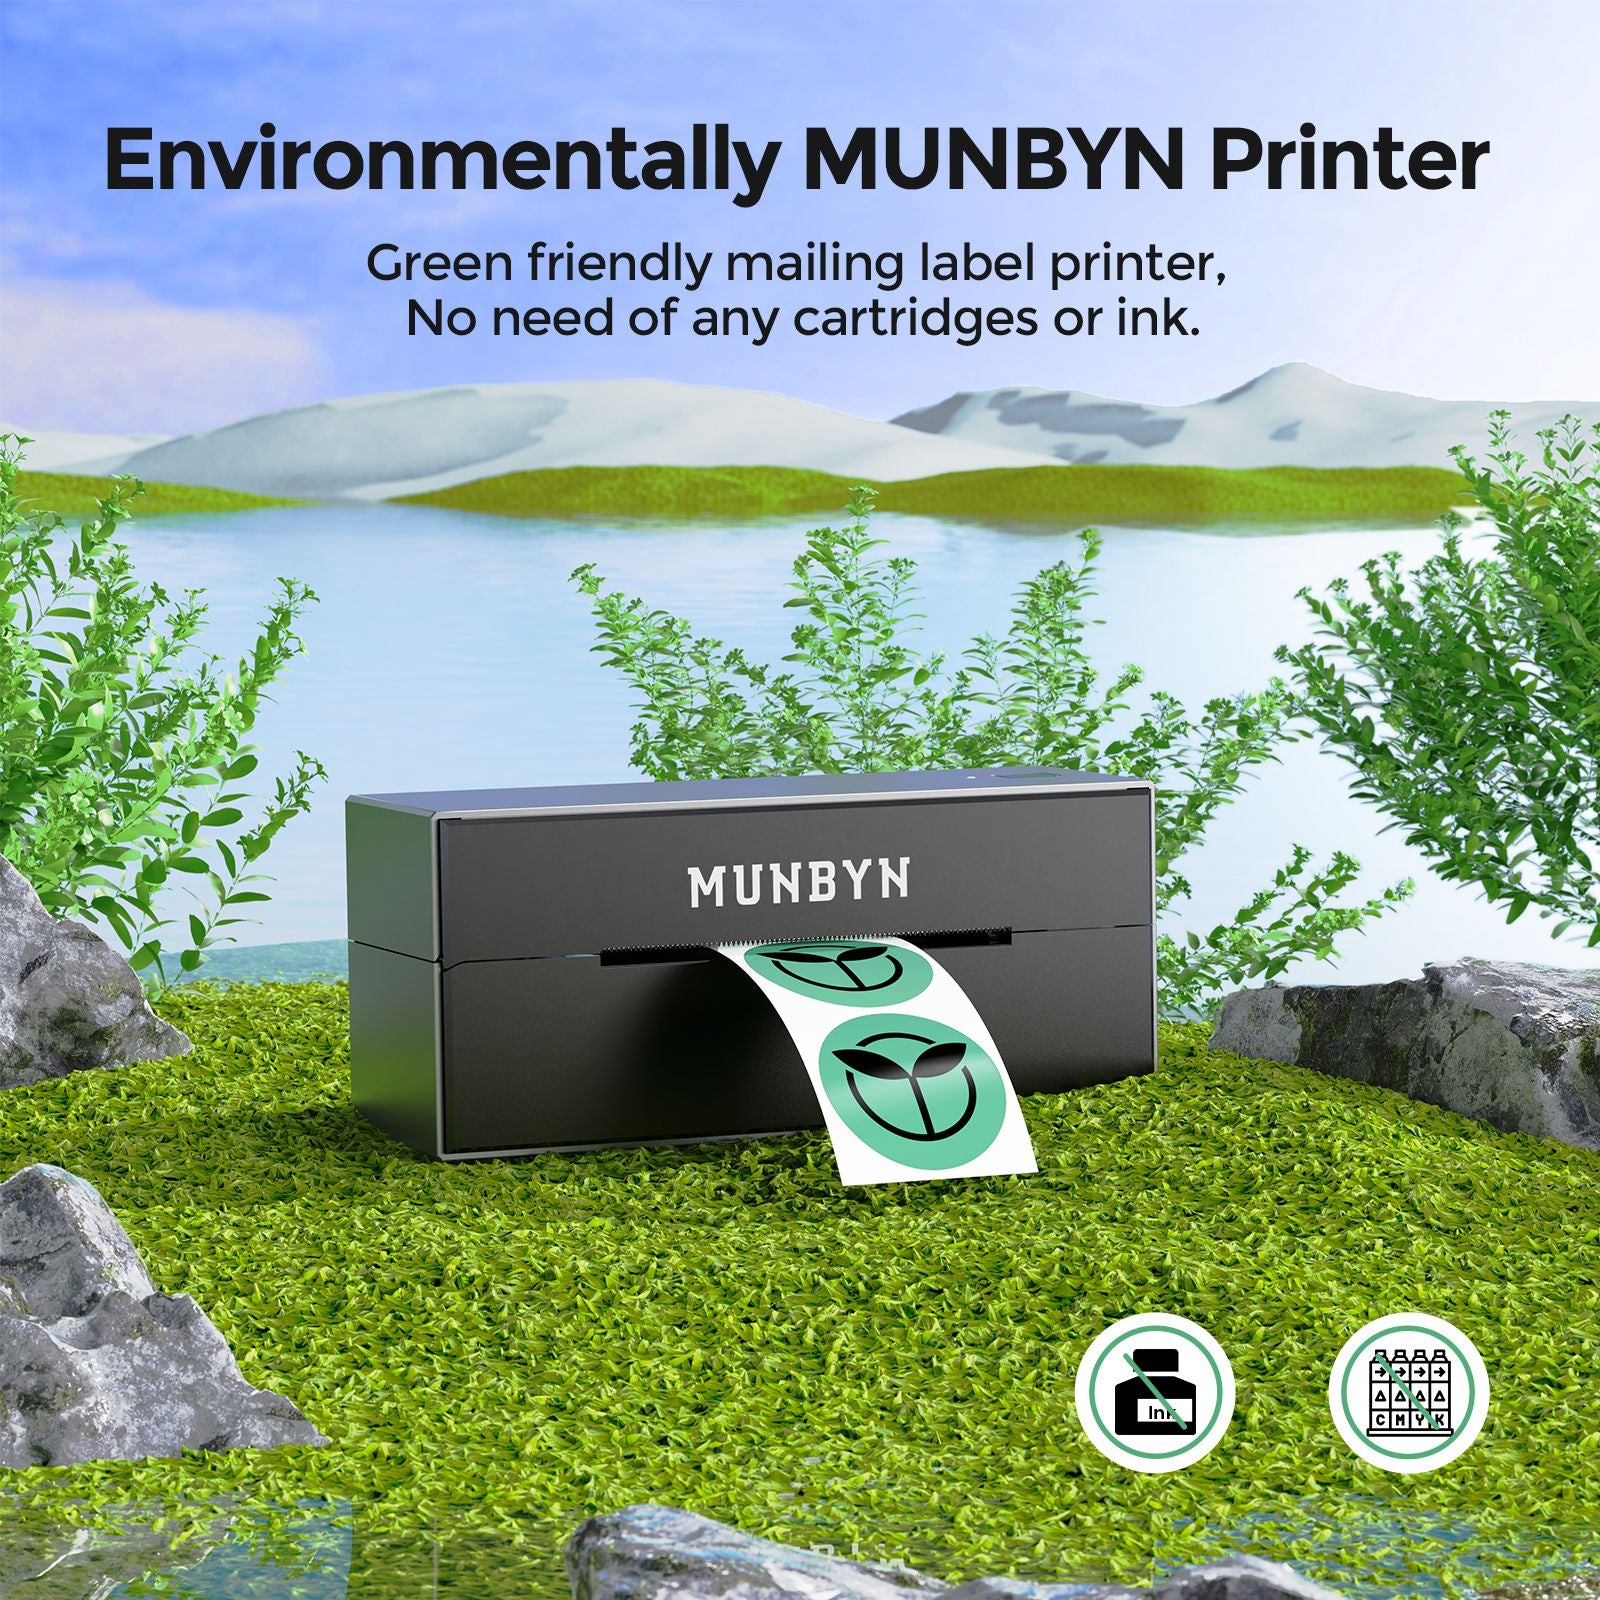 MUNBYN black Bluetooth direct thermal label printer is eco-friendly and has no need for ink or cartridges.